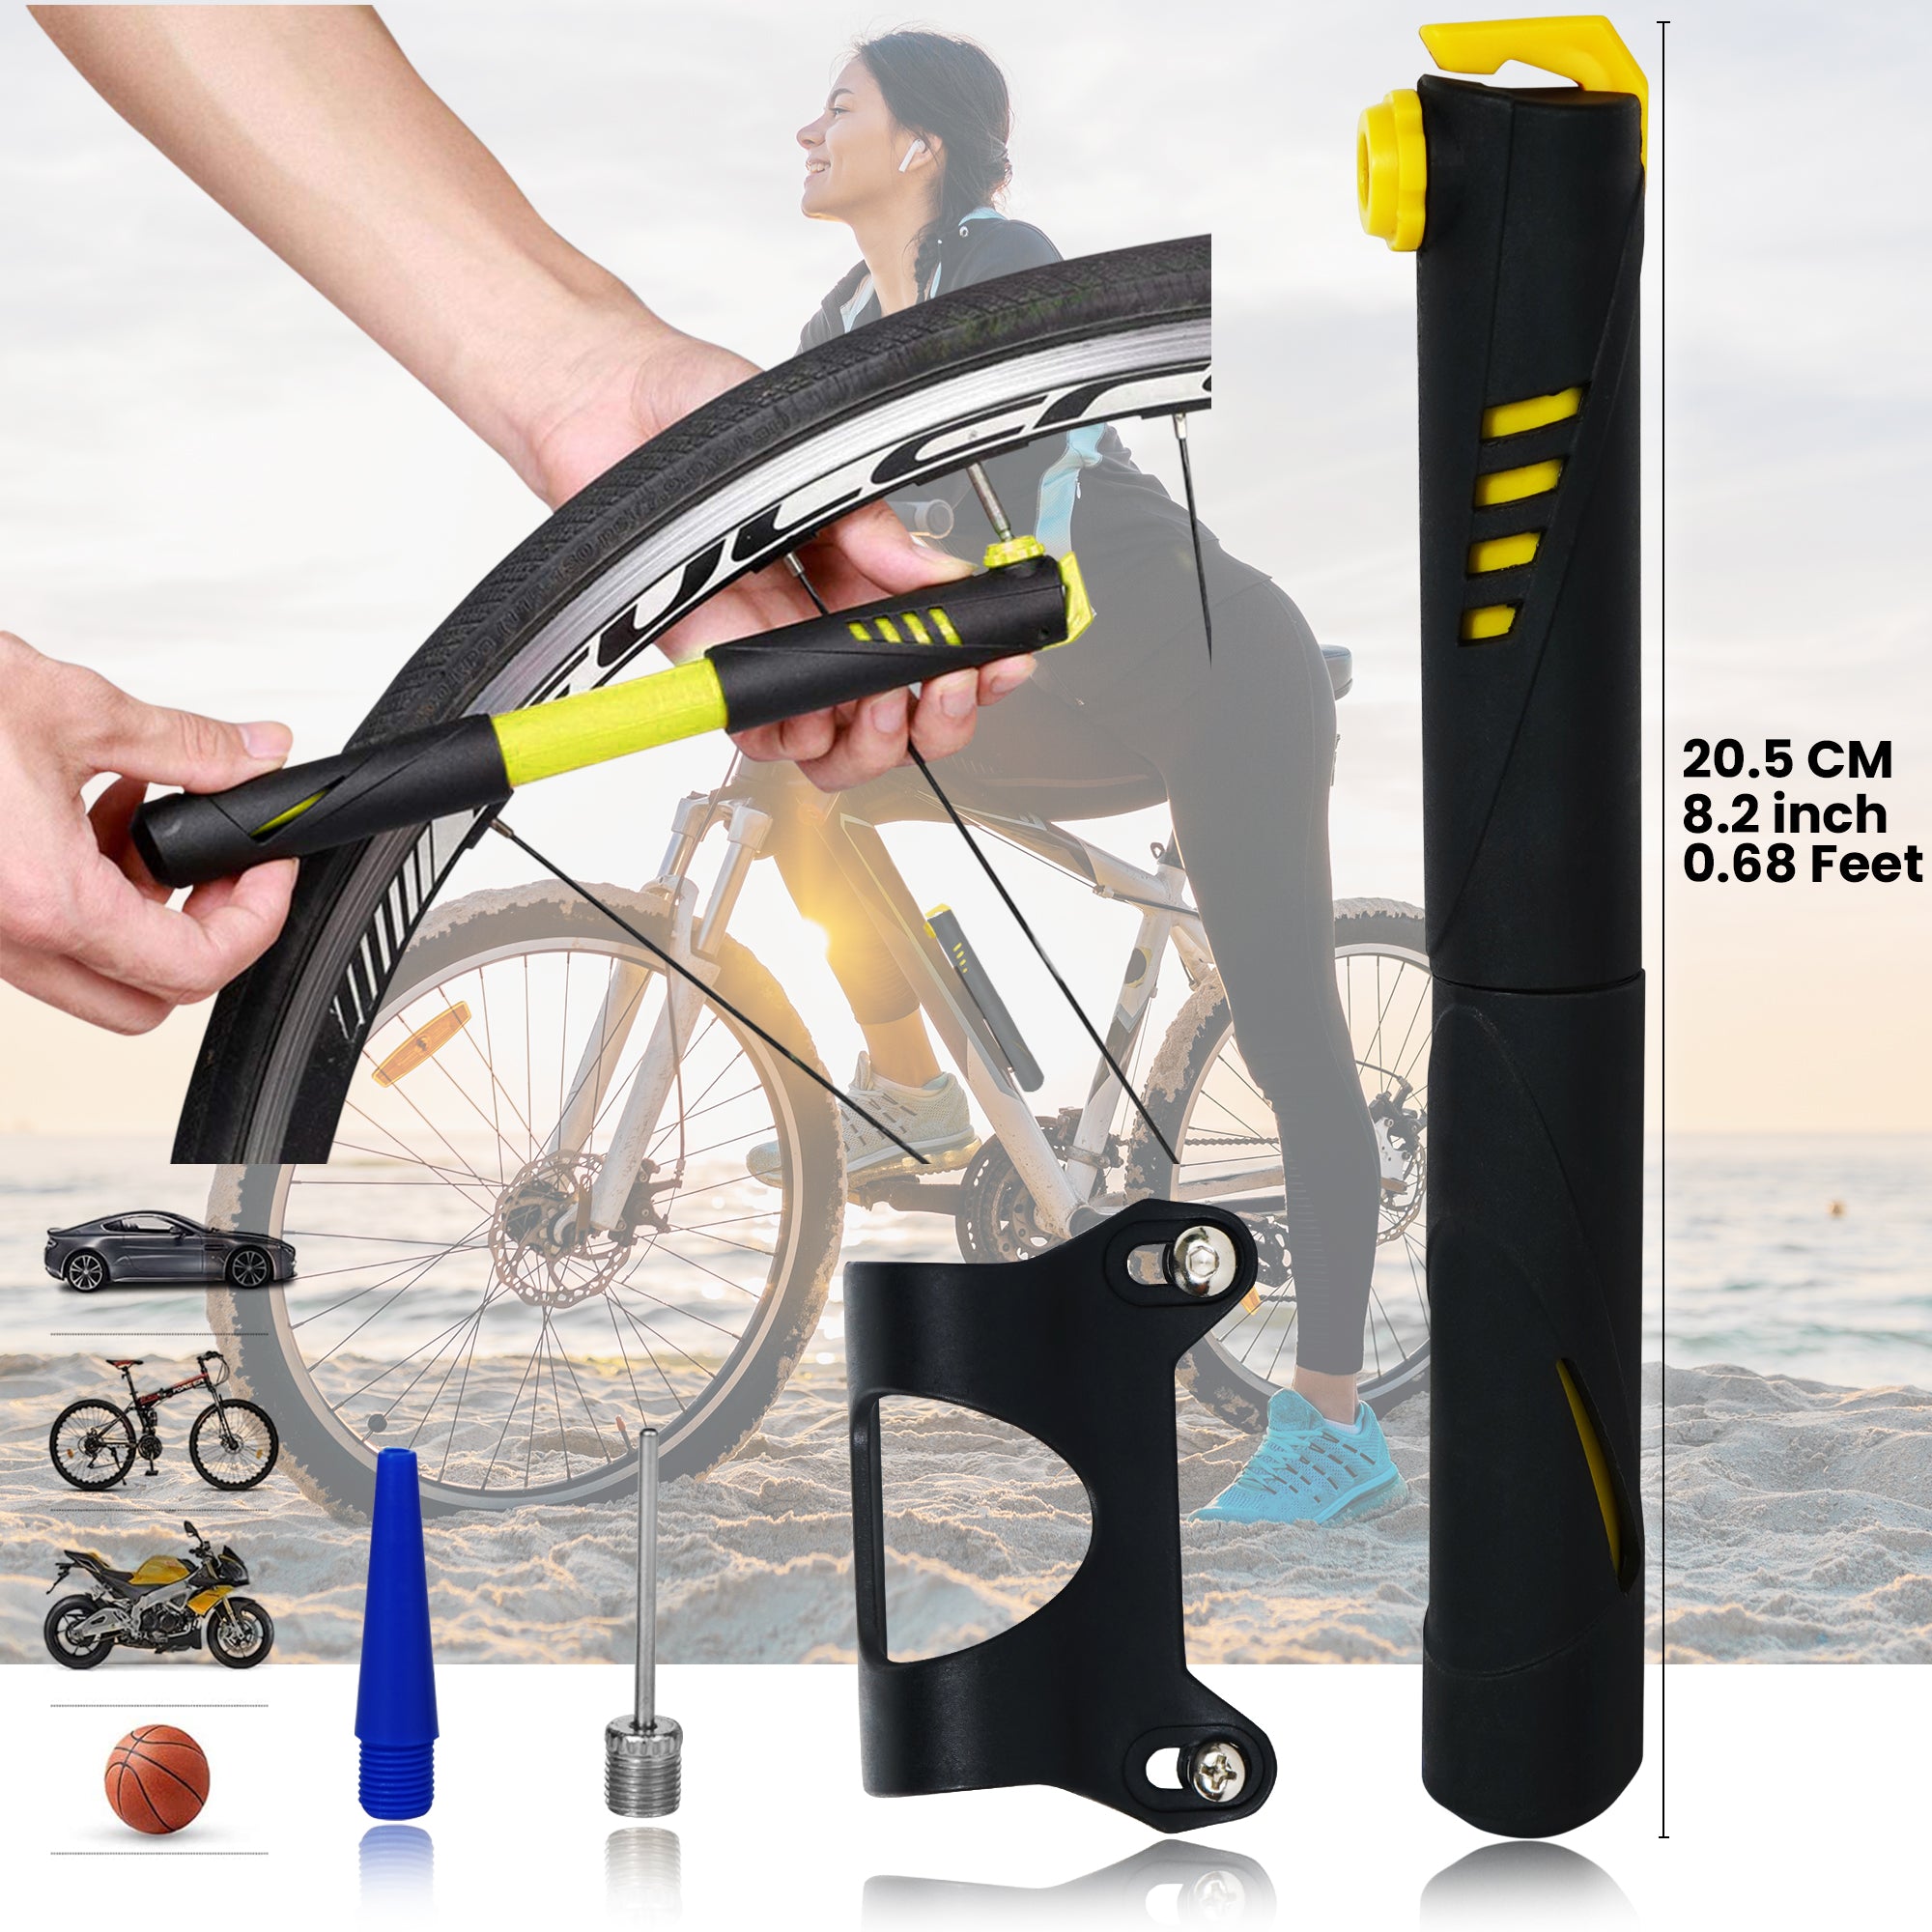 Enhance cycling with top accessories